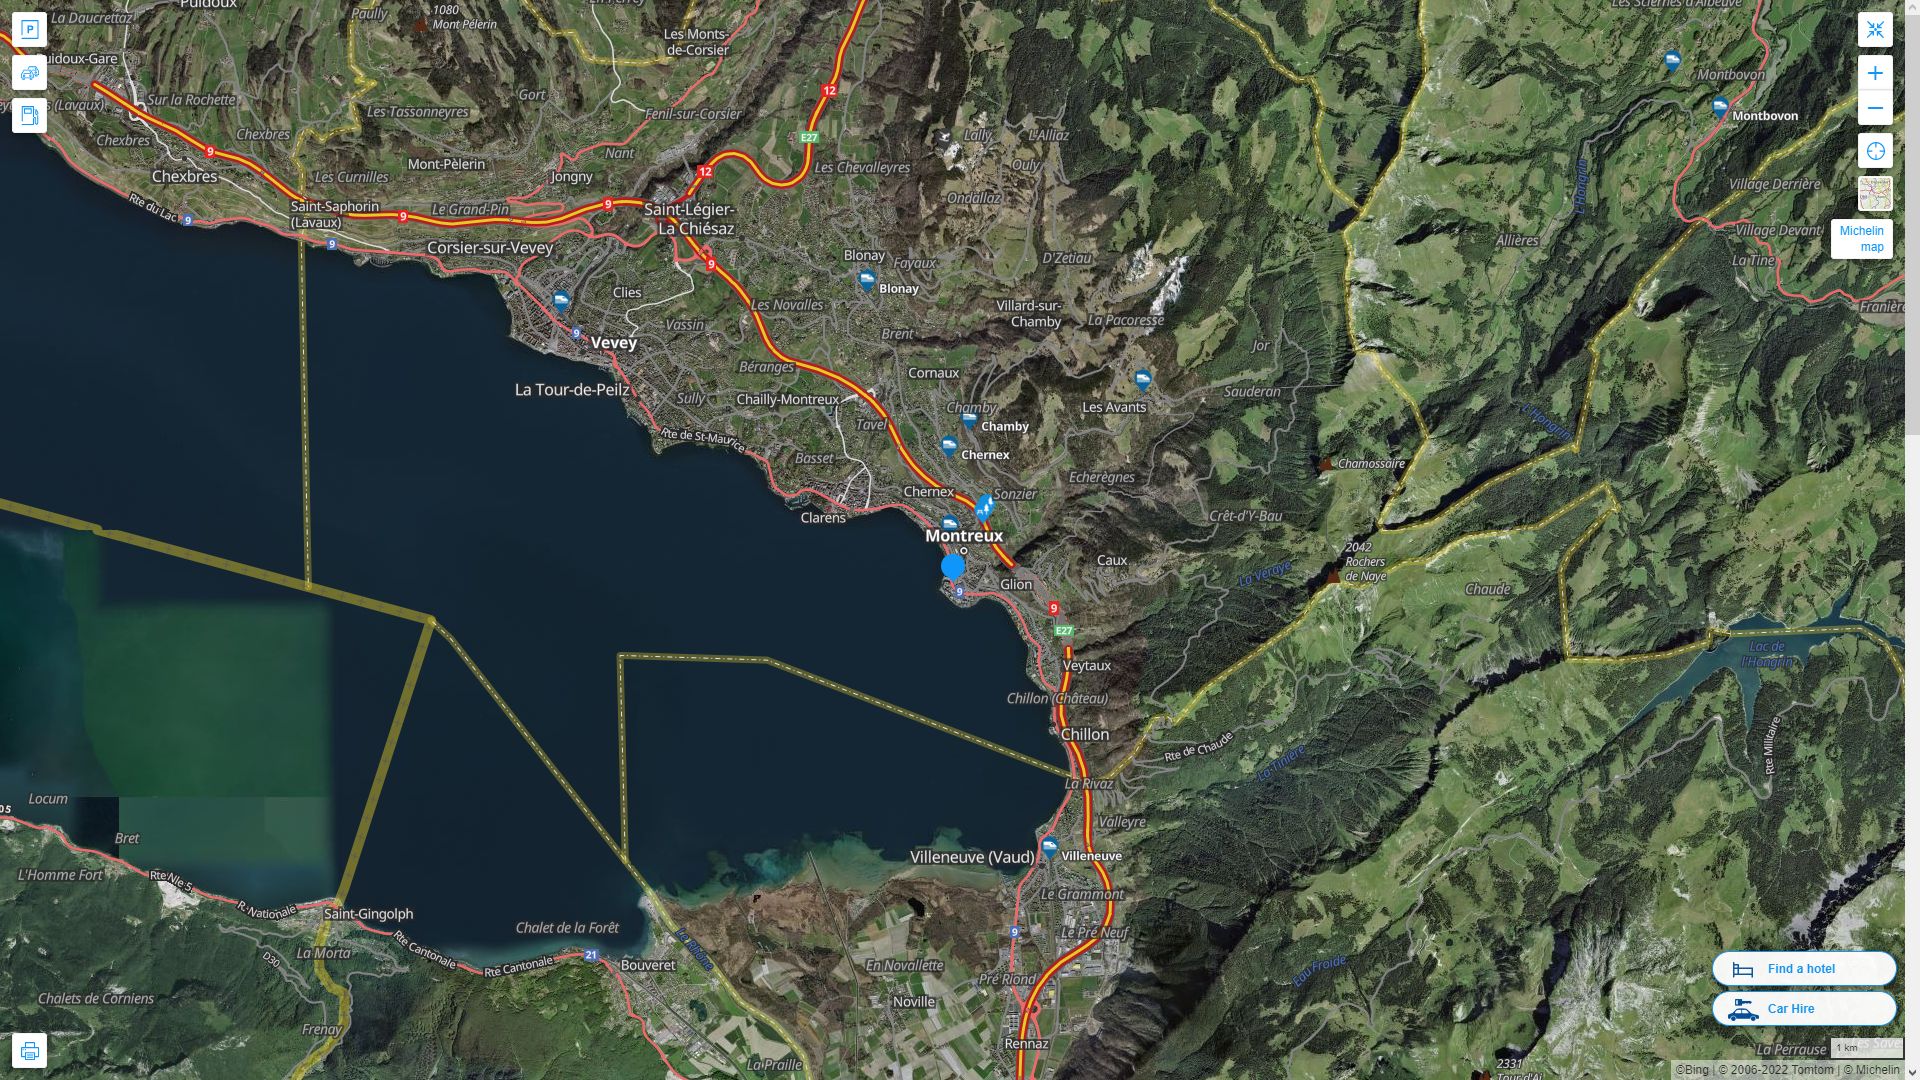 Montreux Highway and Road Map with Satellite View